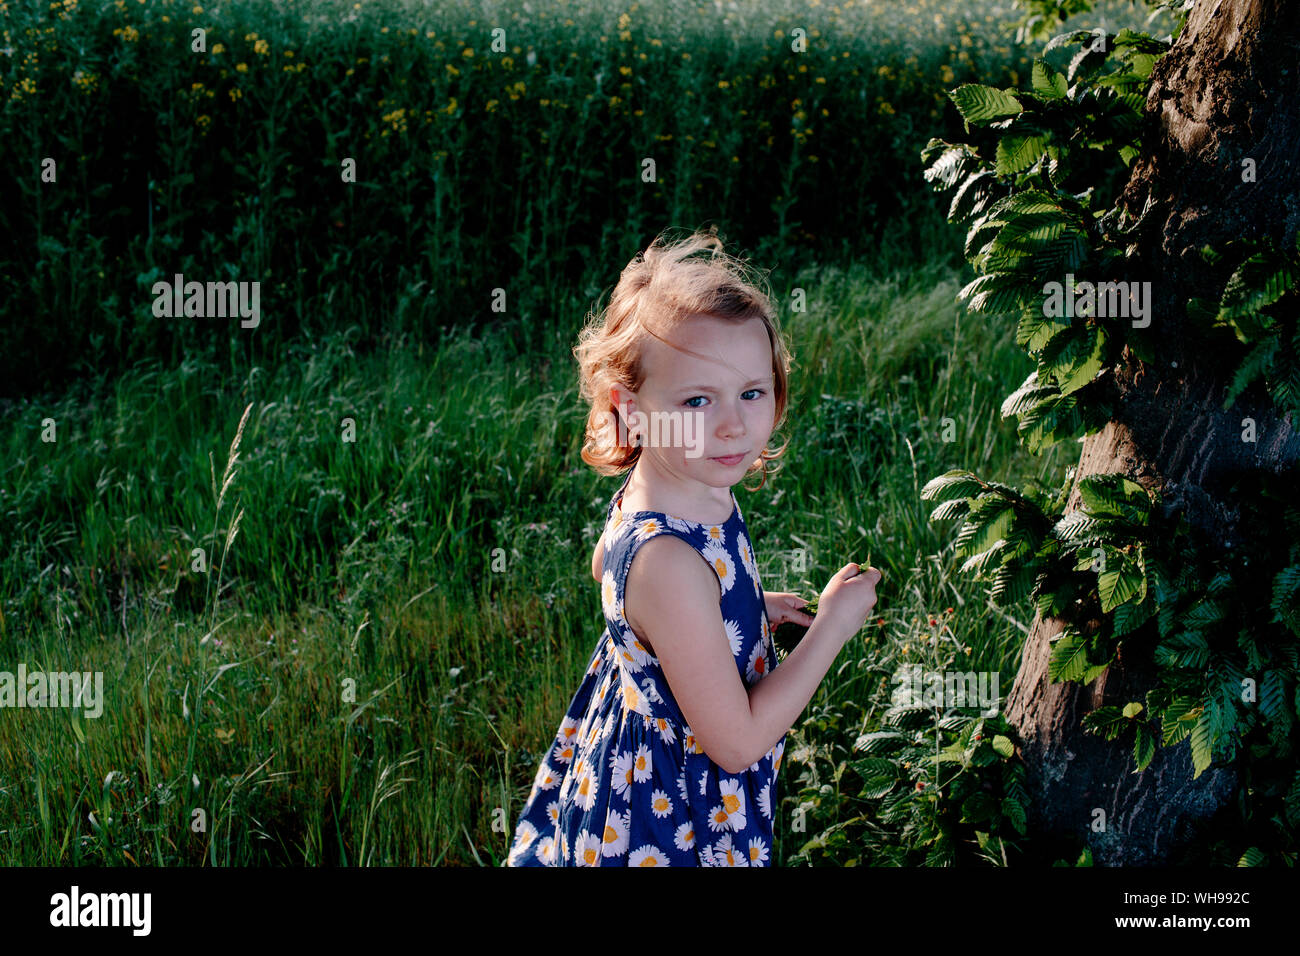 Portrait of  little girl in nature Stock Photo